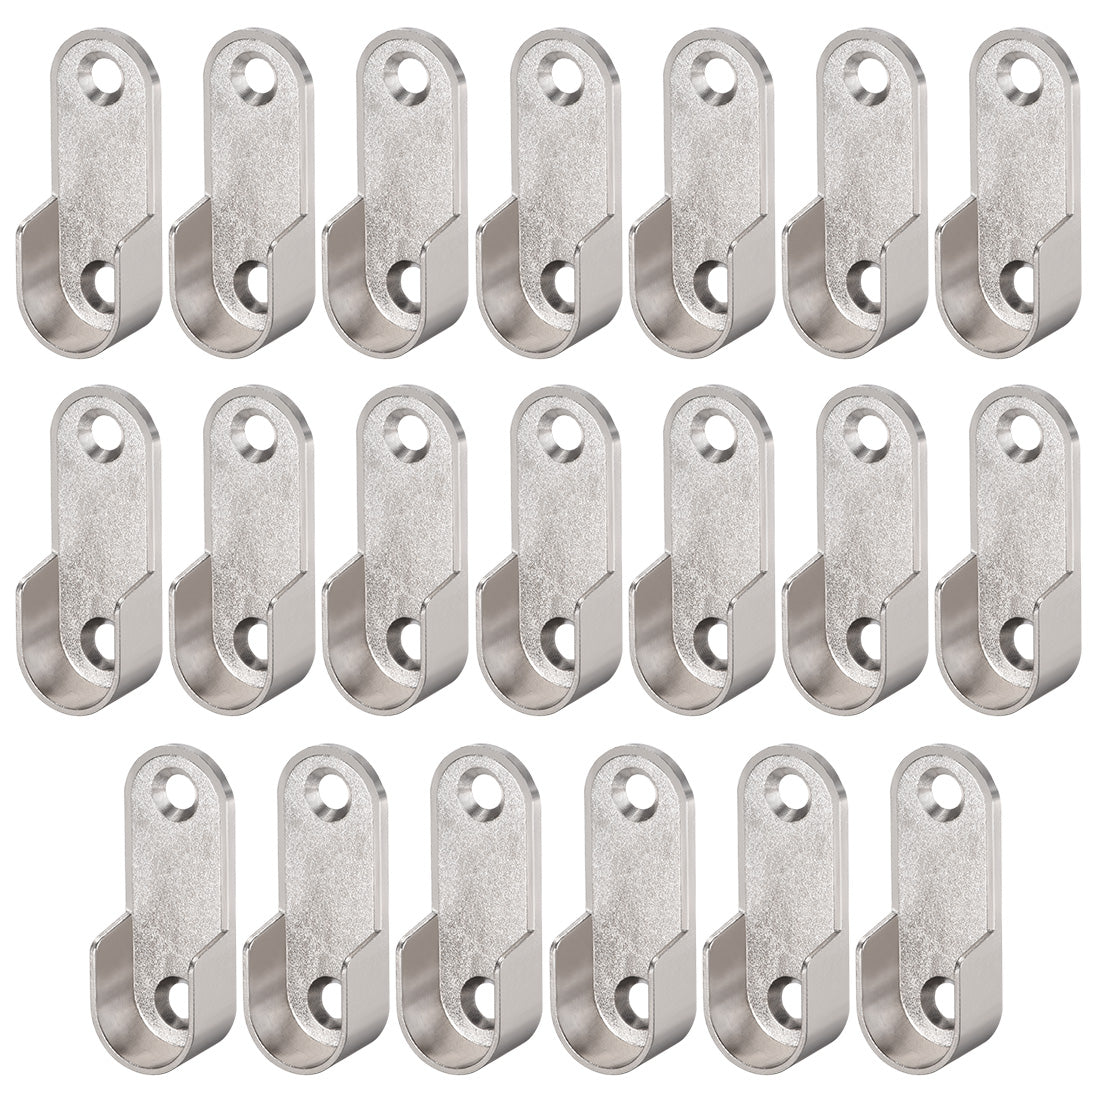 uxcell Uxcell Zinc Alloy Oval Closet Rod End Supports, Wardrobe Rod Flange Bracket Support Fit Rod Dia 16mm 20 PCS